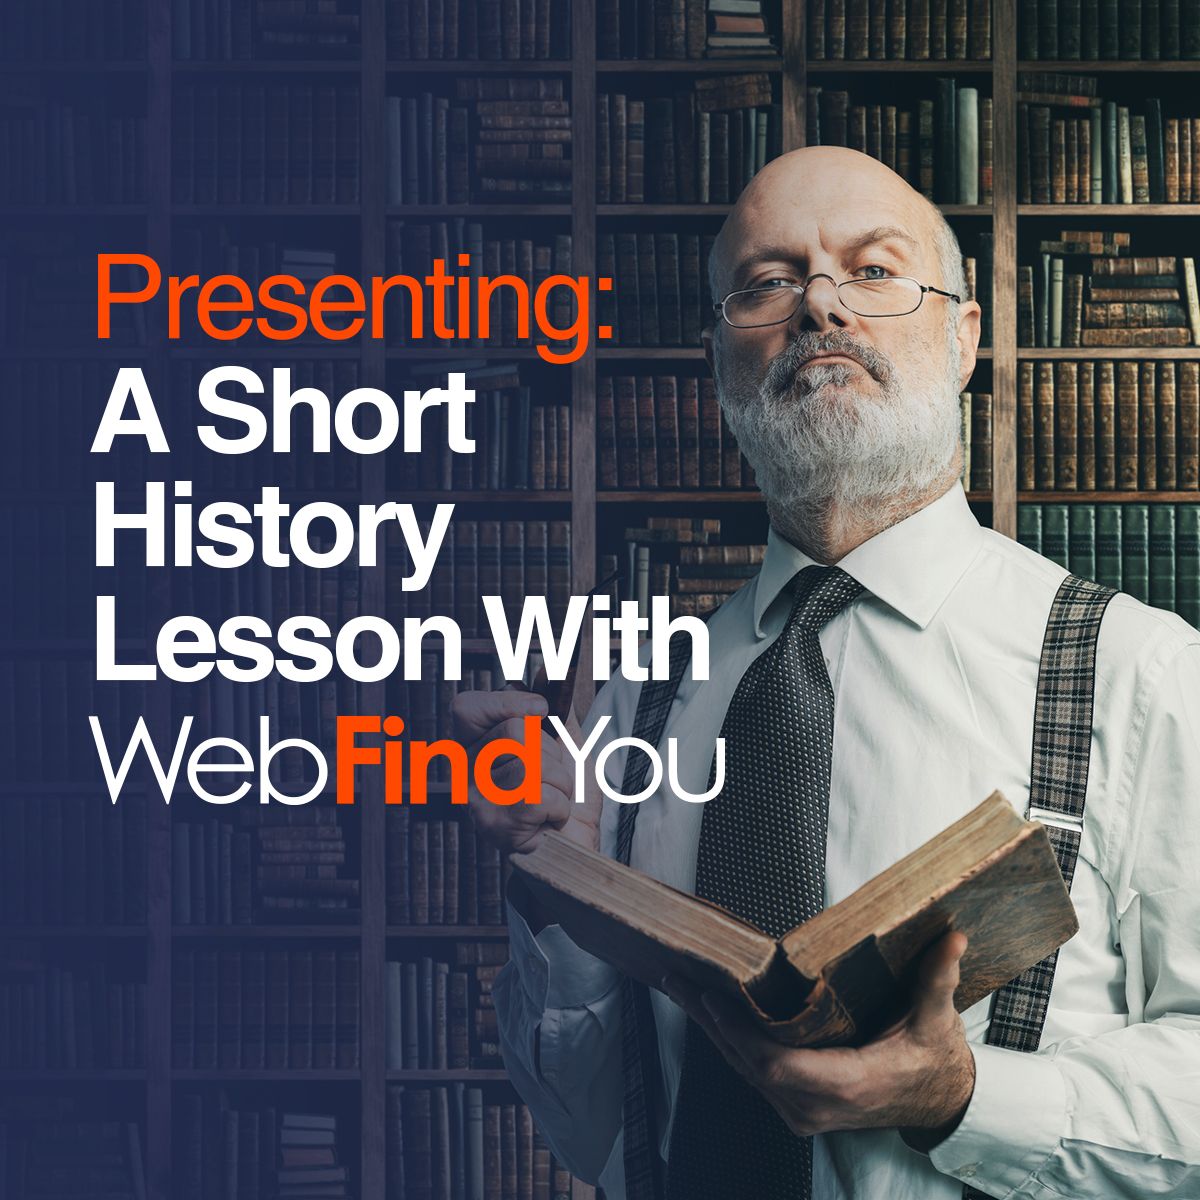 Presenting: A Short History Lesson With WebFindYou